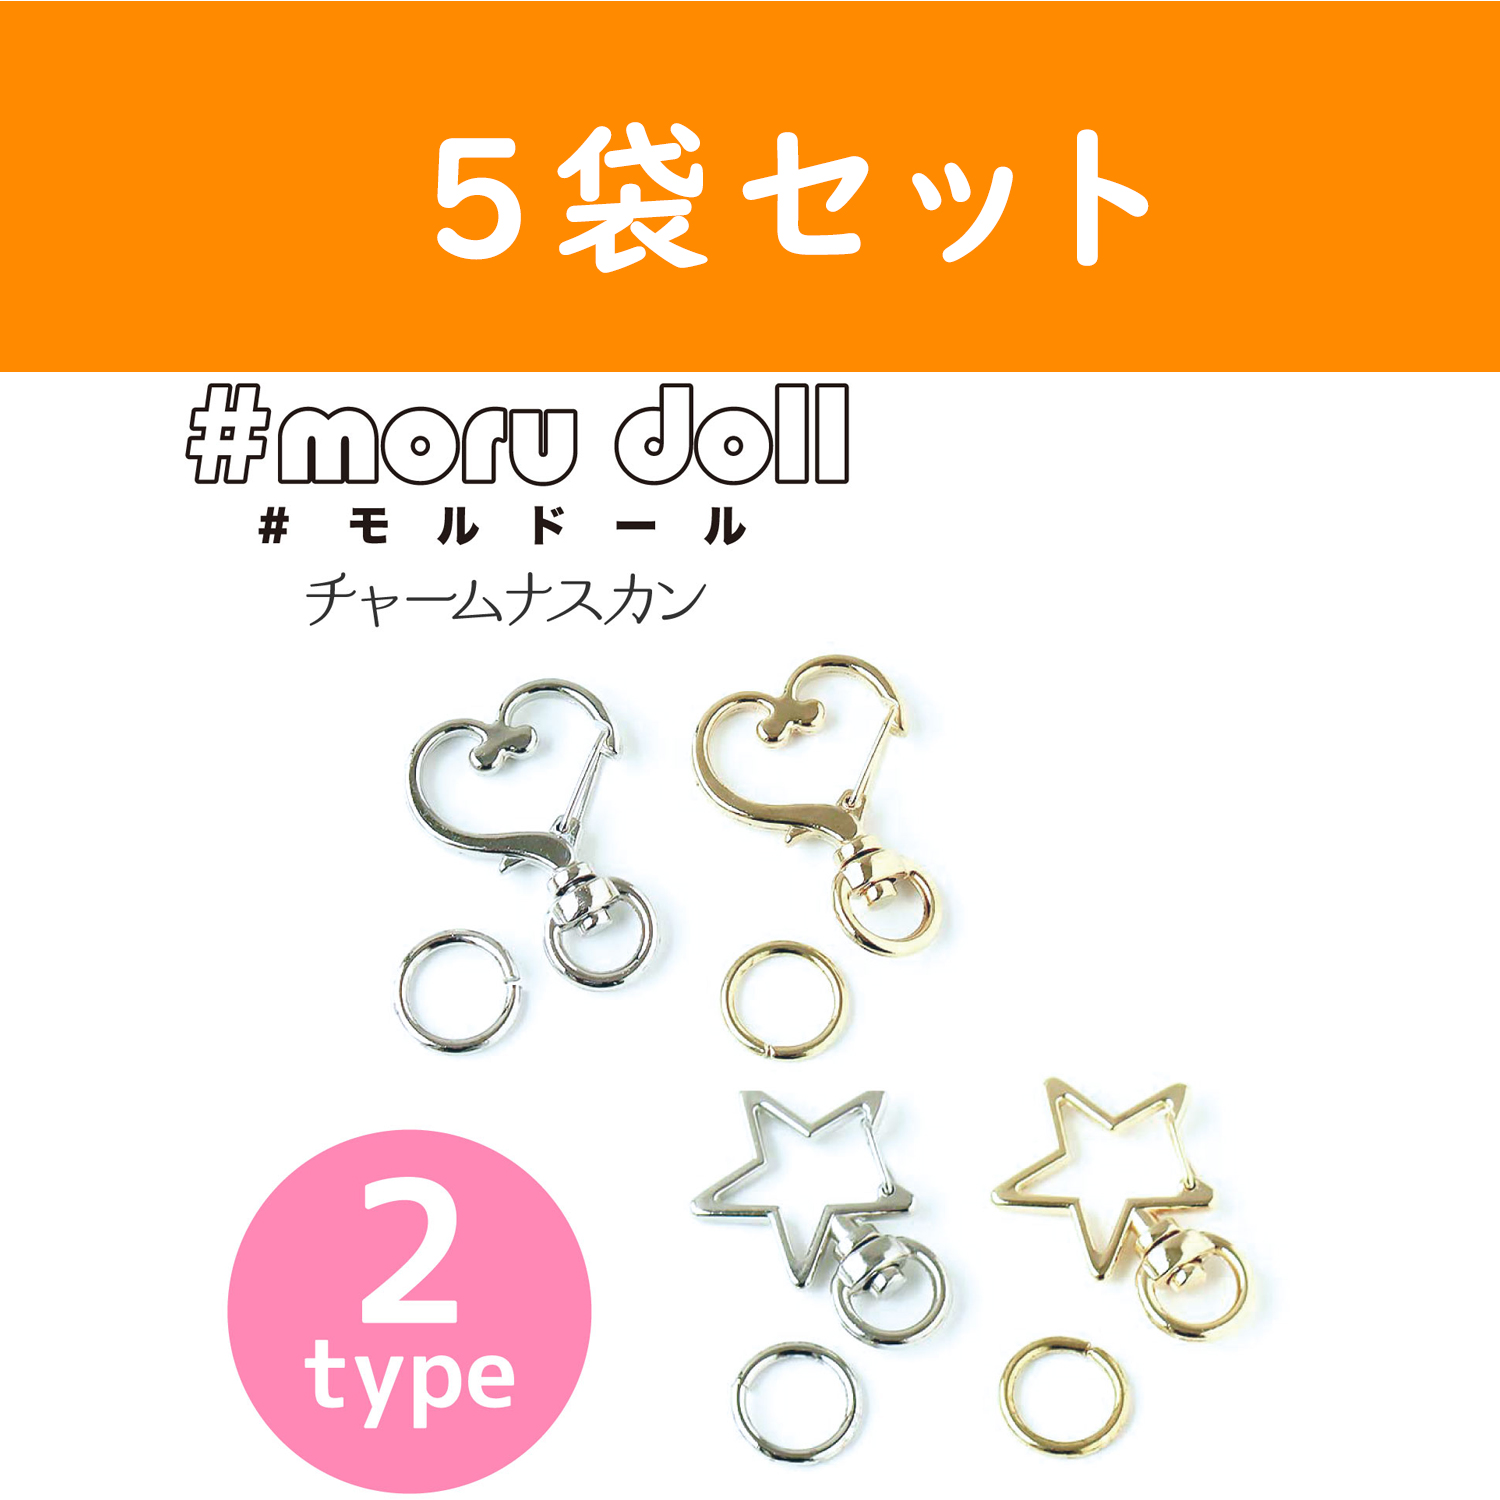 MOL-5 Molle doll Korean miscellaneous goods Charm eggplant ring with ring 1pcs×5 pack set (Set)